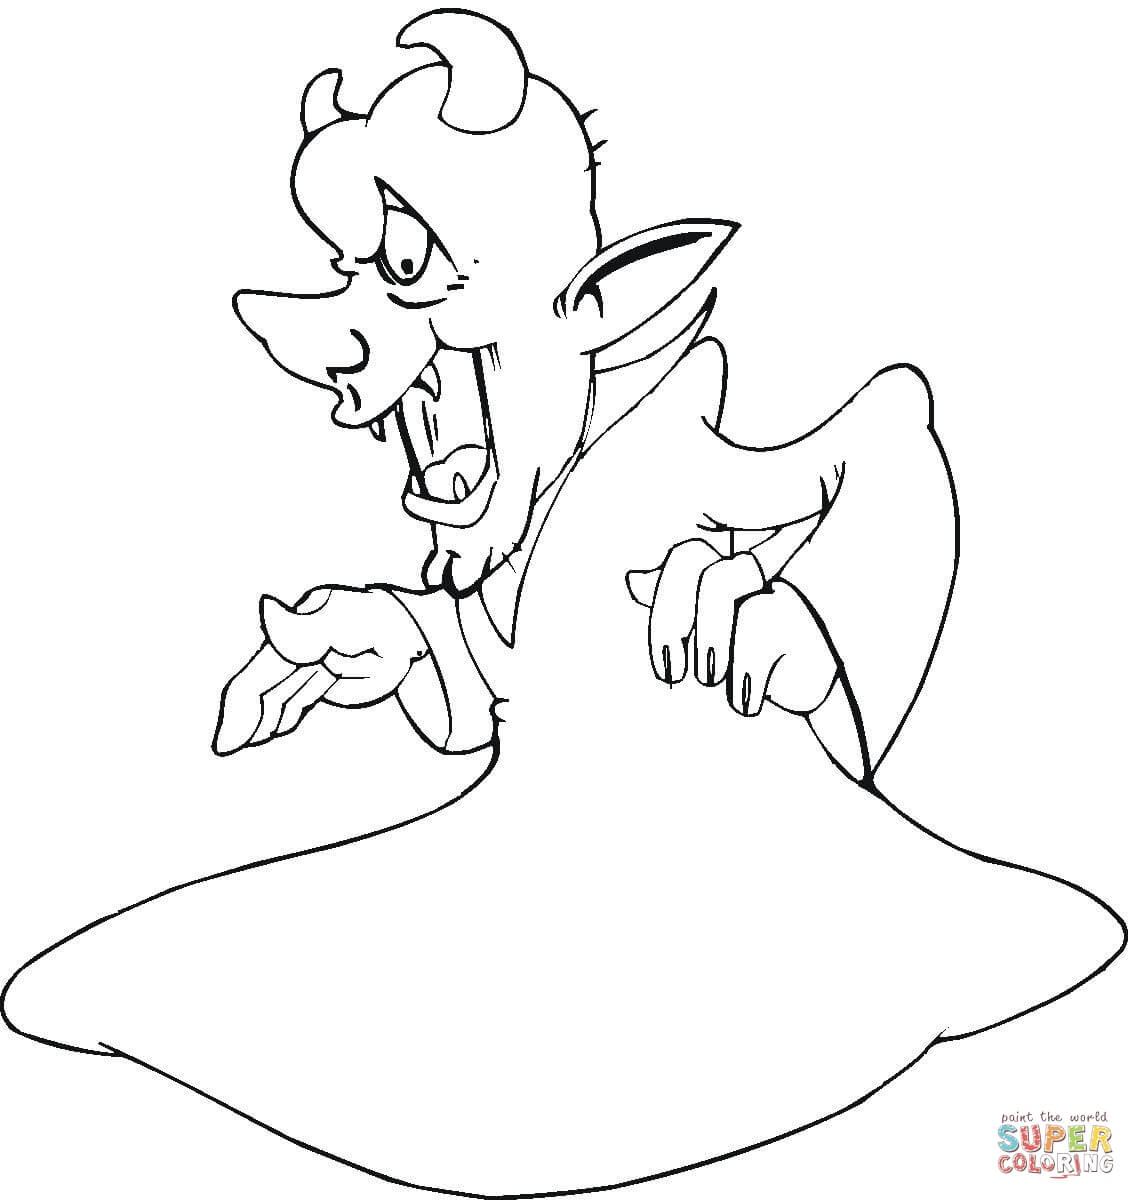 Evil Demon coloring page | Free Printable Coloring Pages